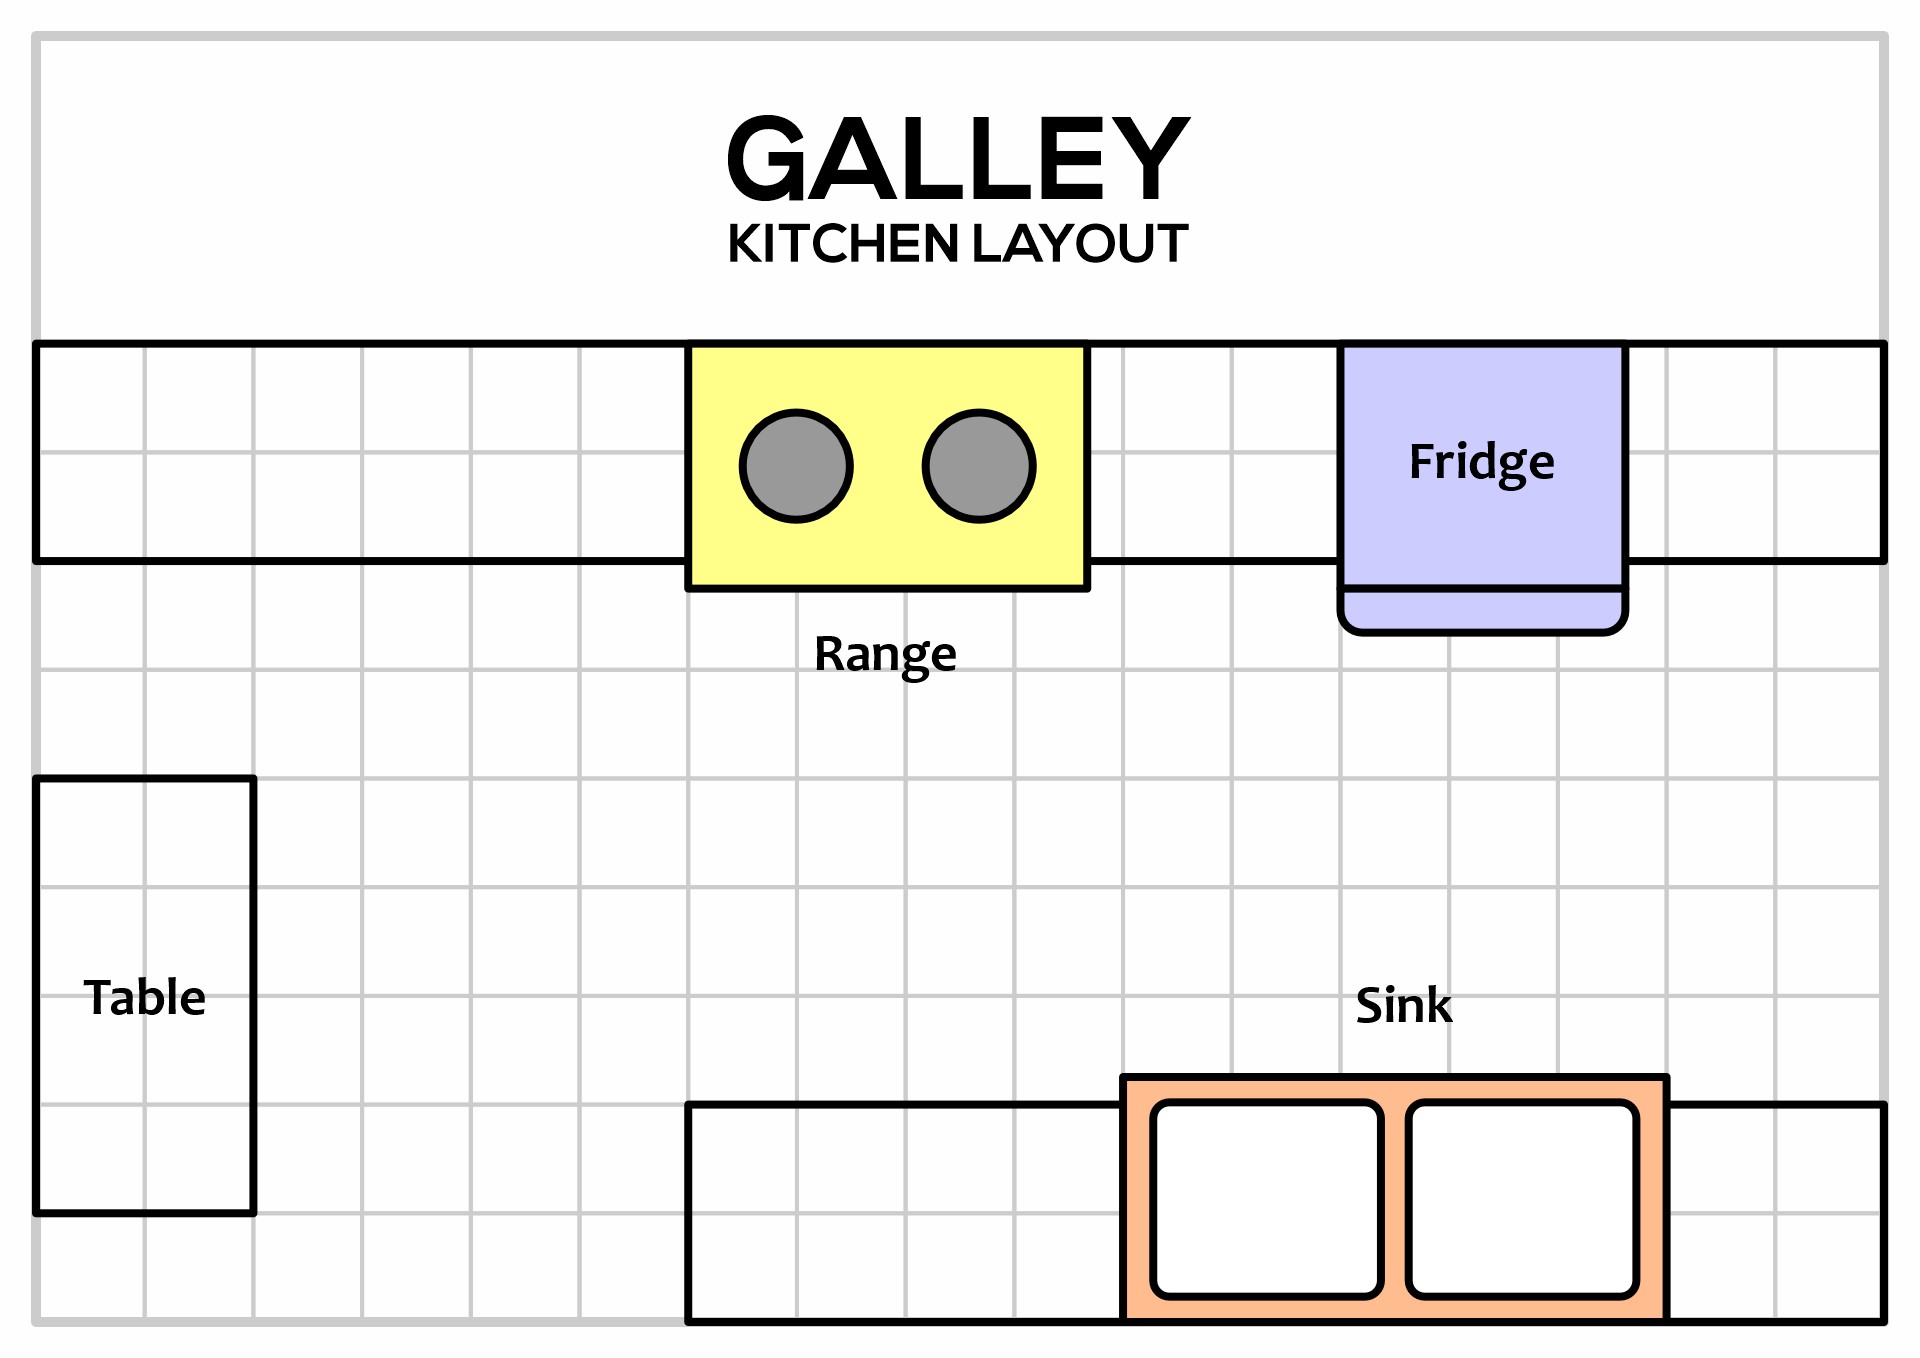 11 Best Images Of 12 X 12 Kitchen Design Small Kitchen Layout Plans